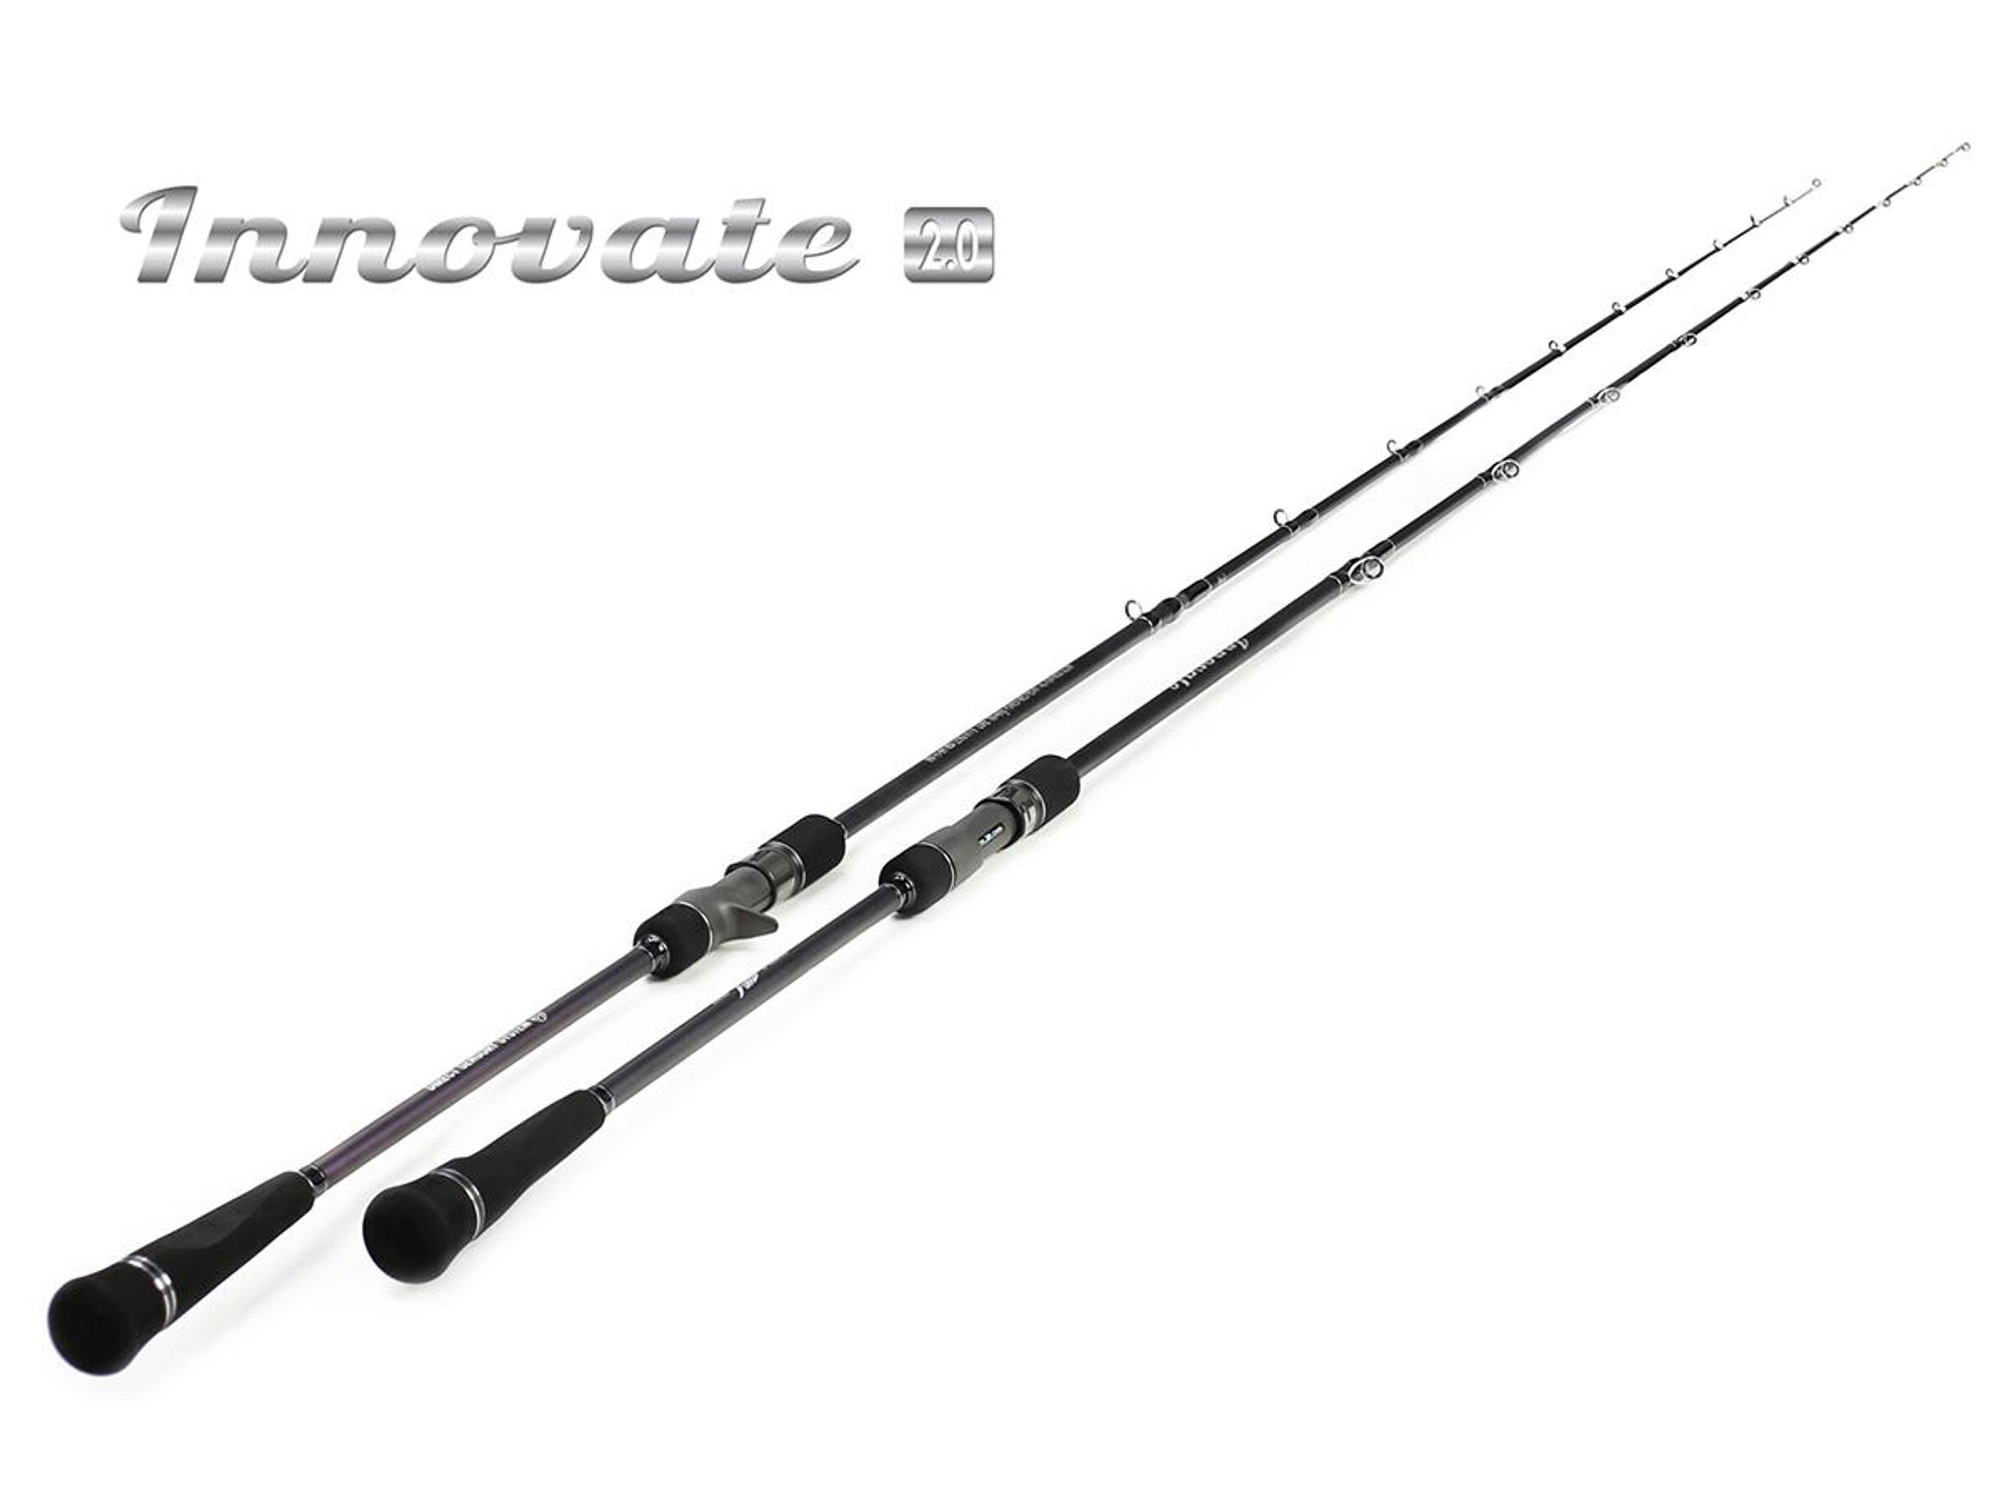 Temple Reef Innovate 2.0 Slow Pitch Jig Fishing Rod (Model: 80MH)